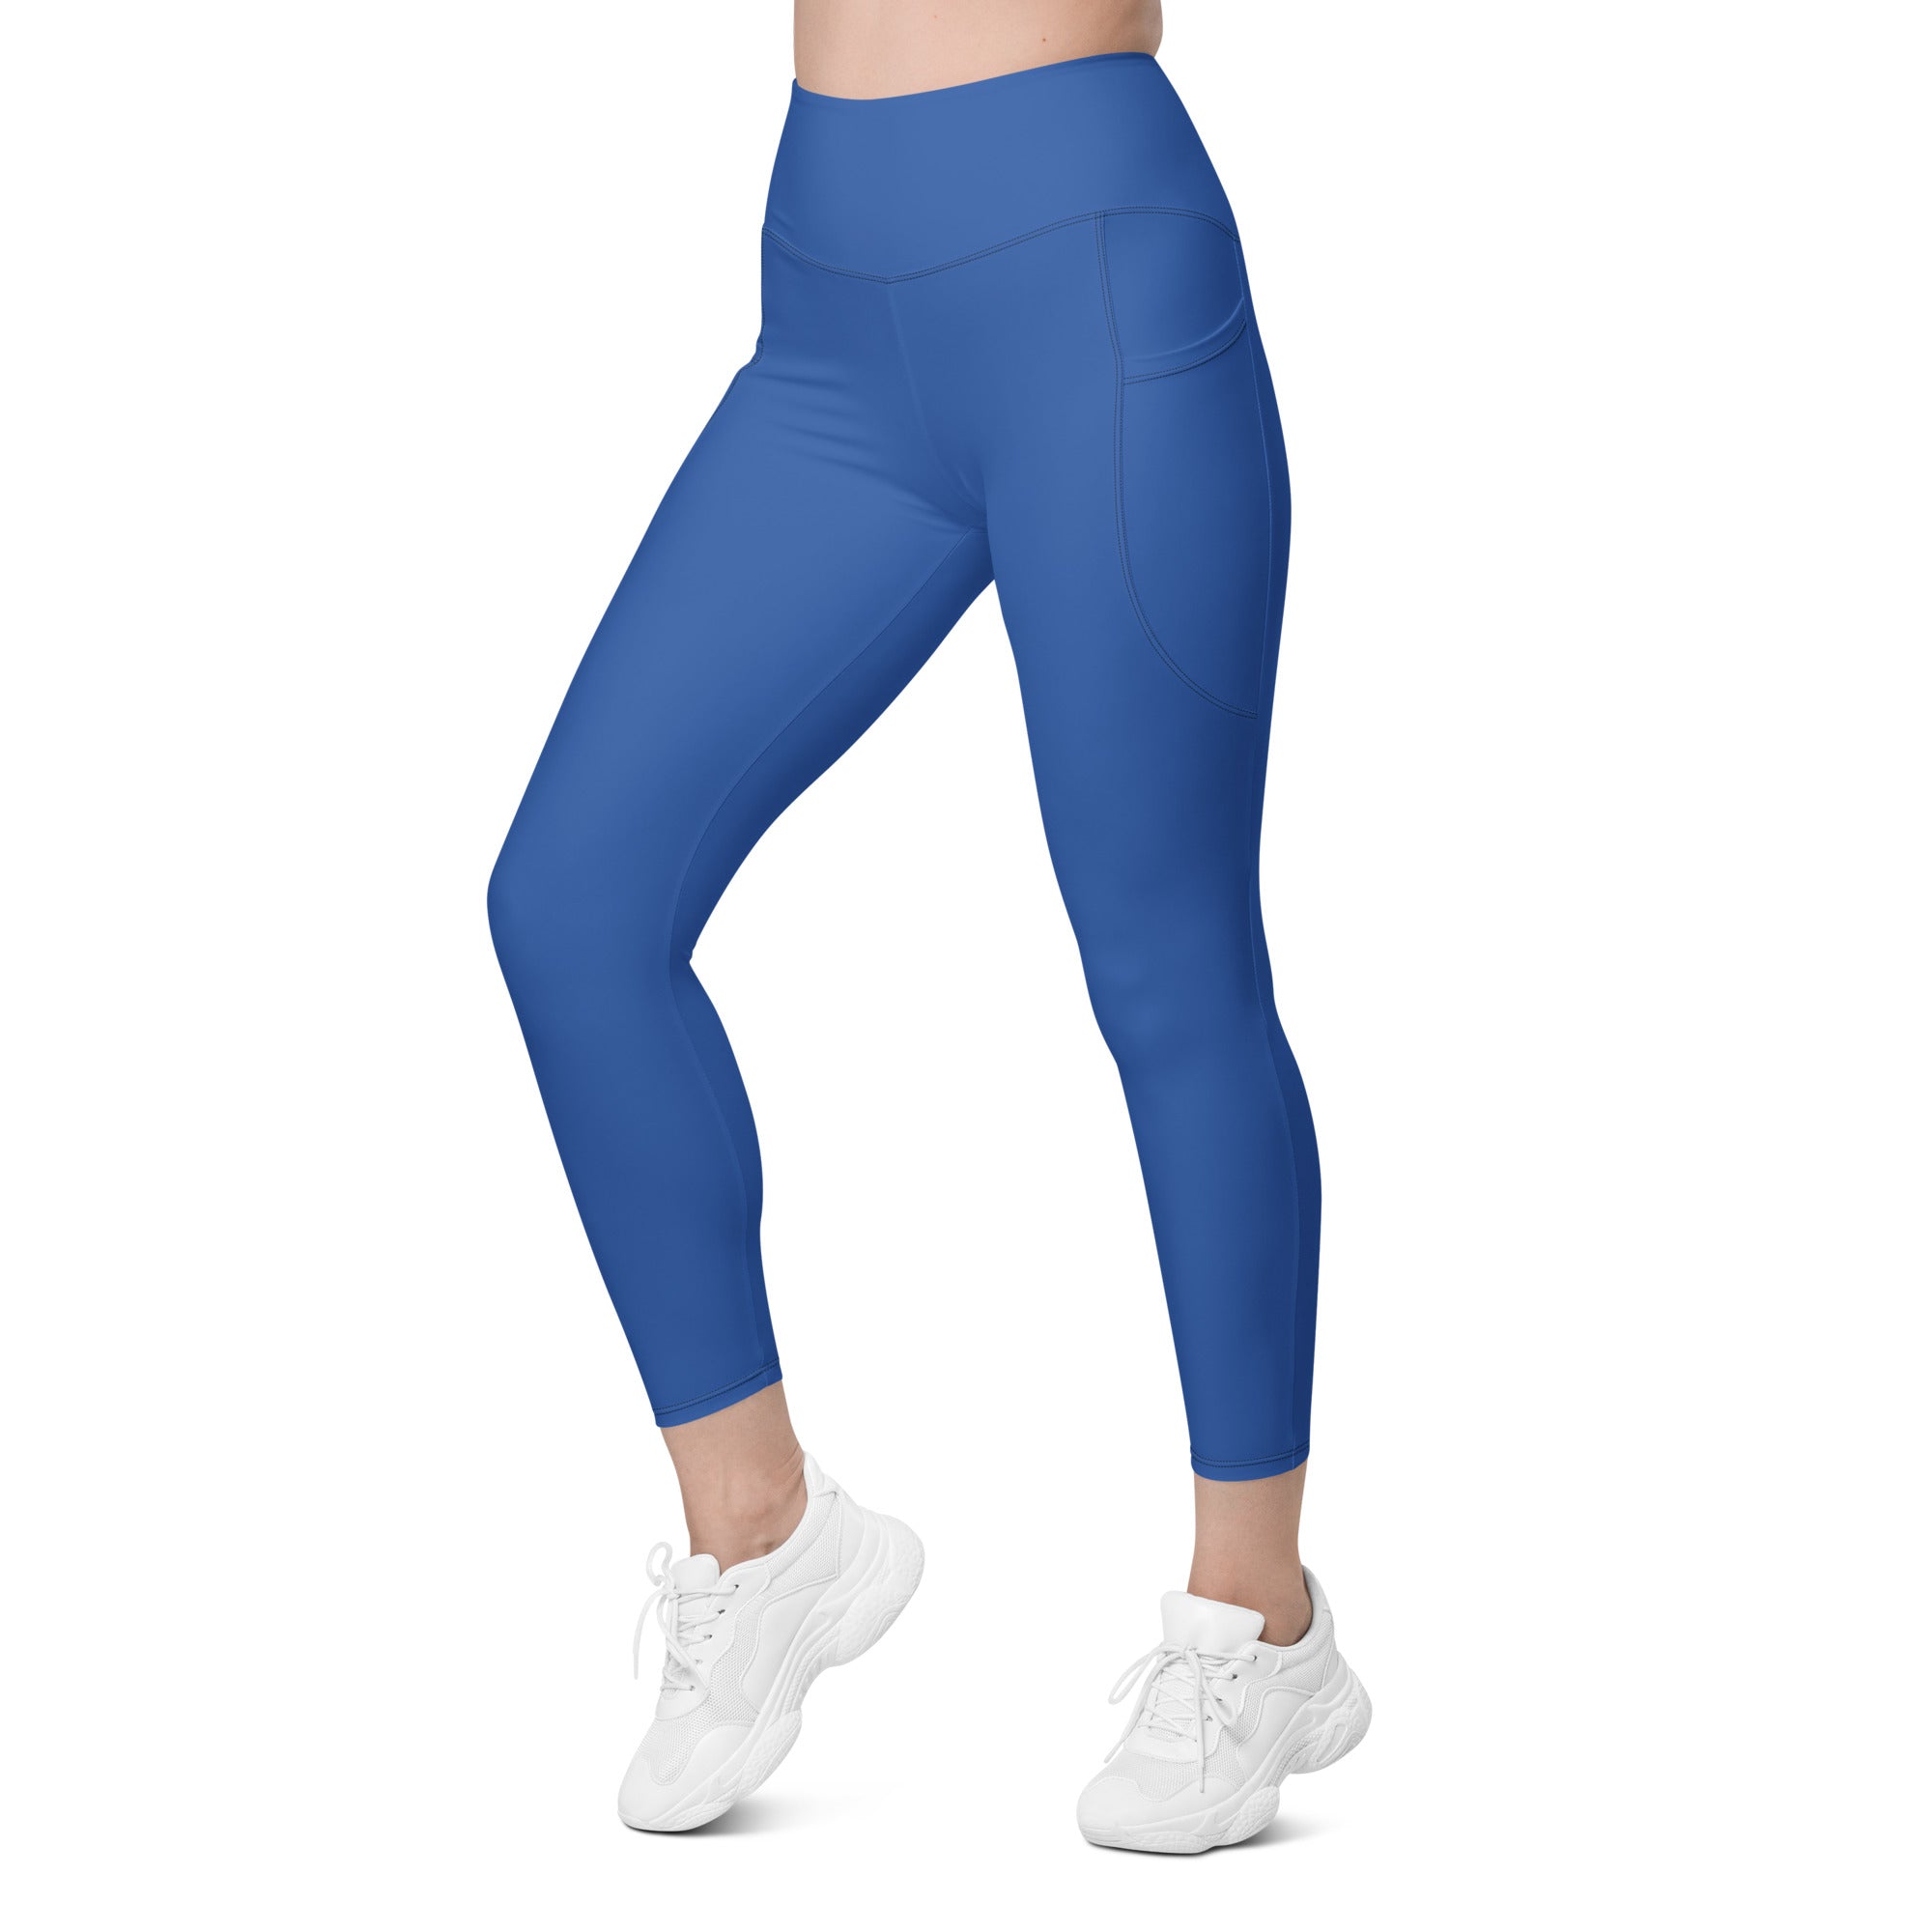 Royal Blue Leggings With Pockets